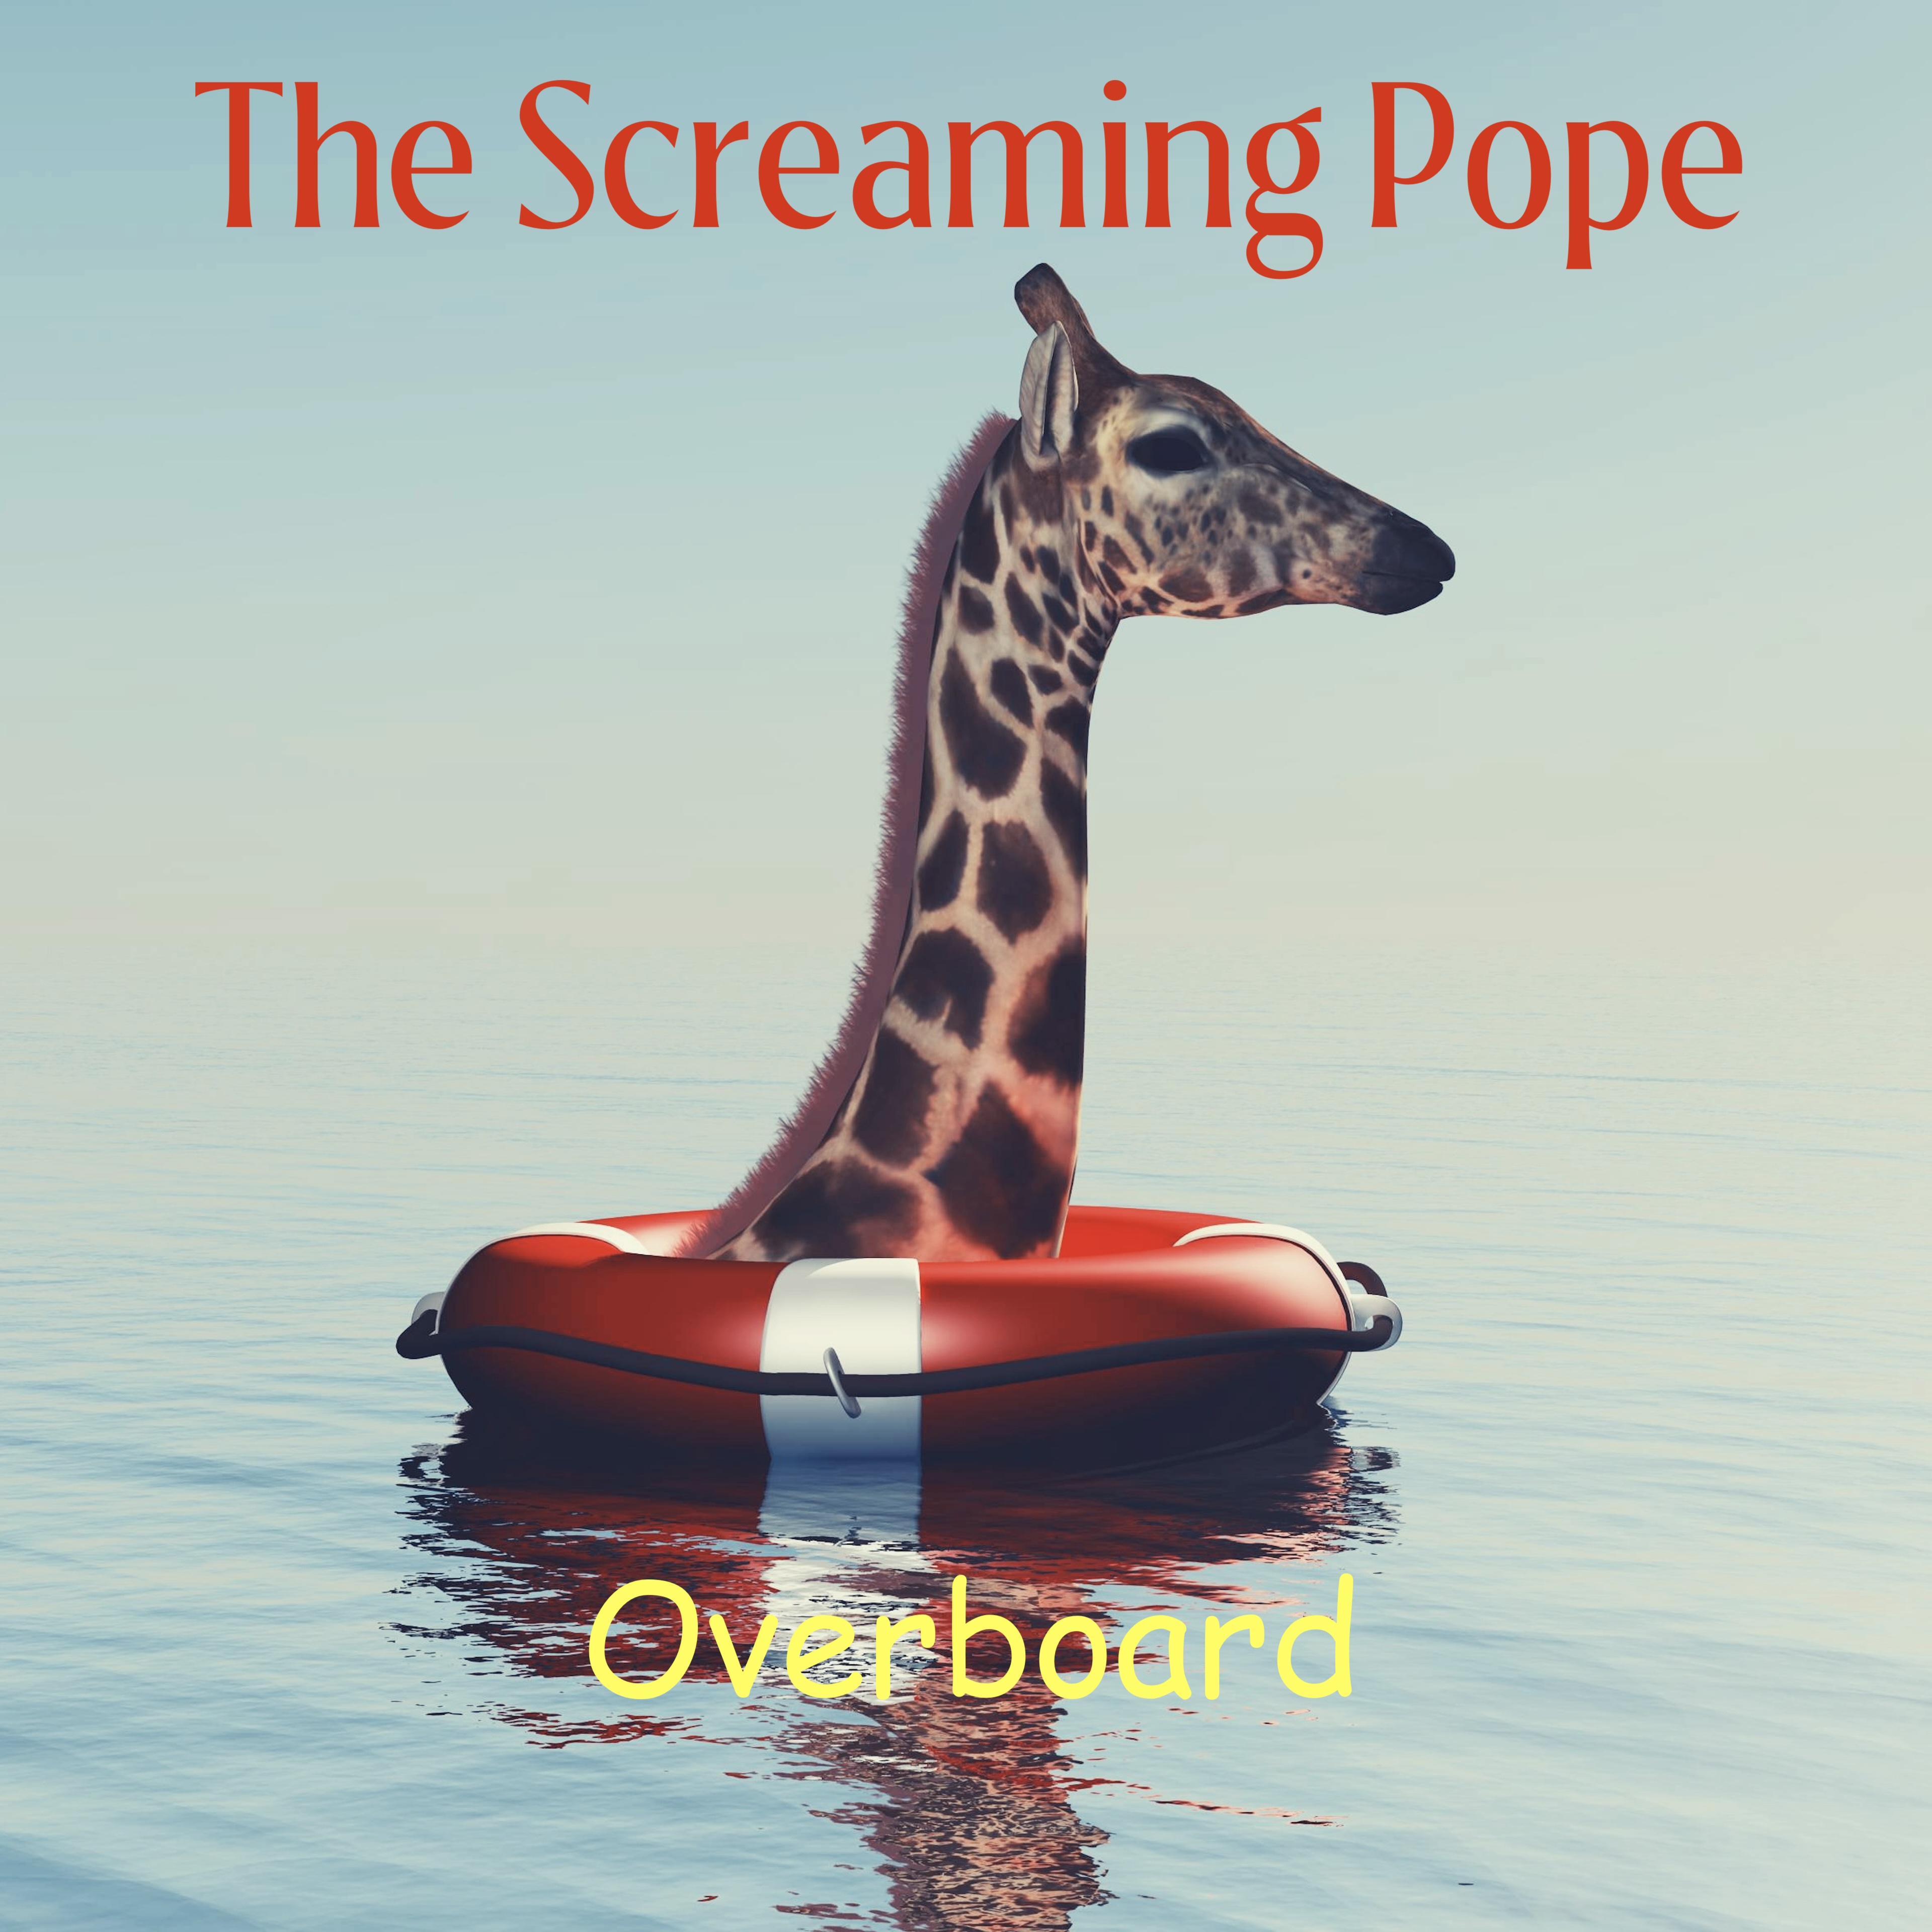 The Screaming Pope Takes Audiences “Overboard” with Experimental Single Release